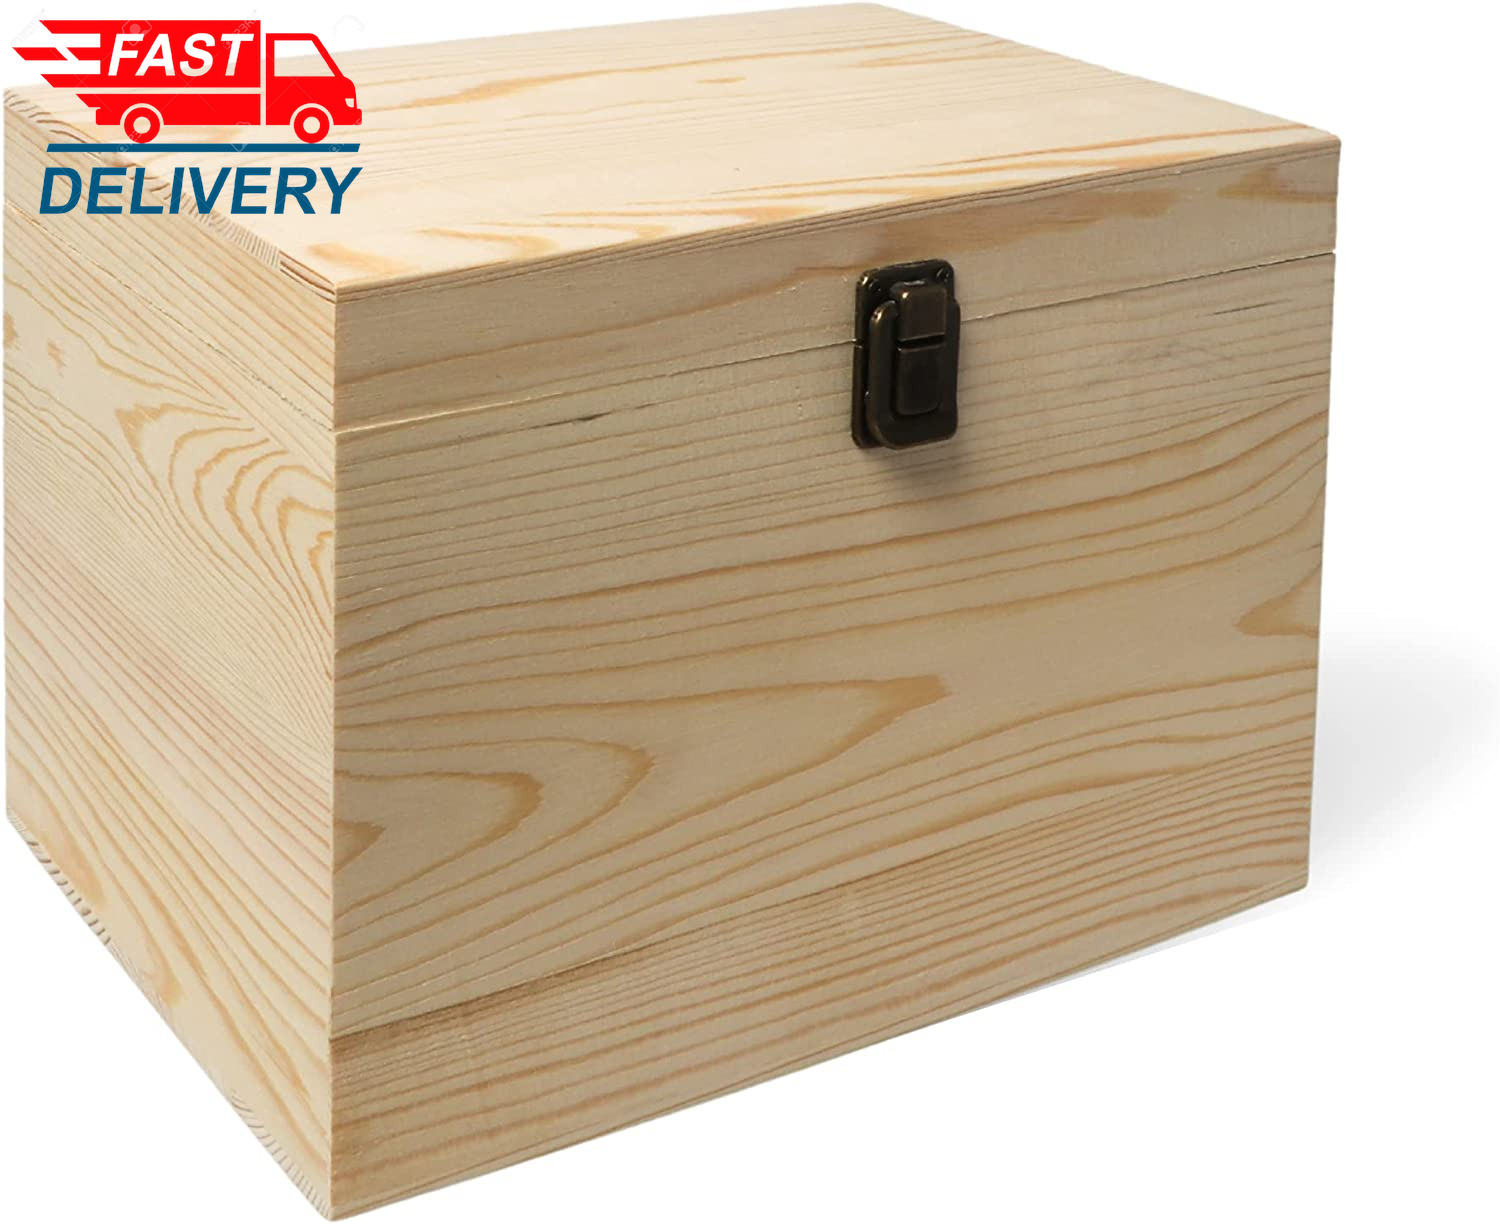 (1-Pack) 10x7x7-Inch Large Unfinished Wooden Box with Hinged Lid & Front Clasp